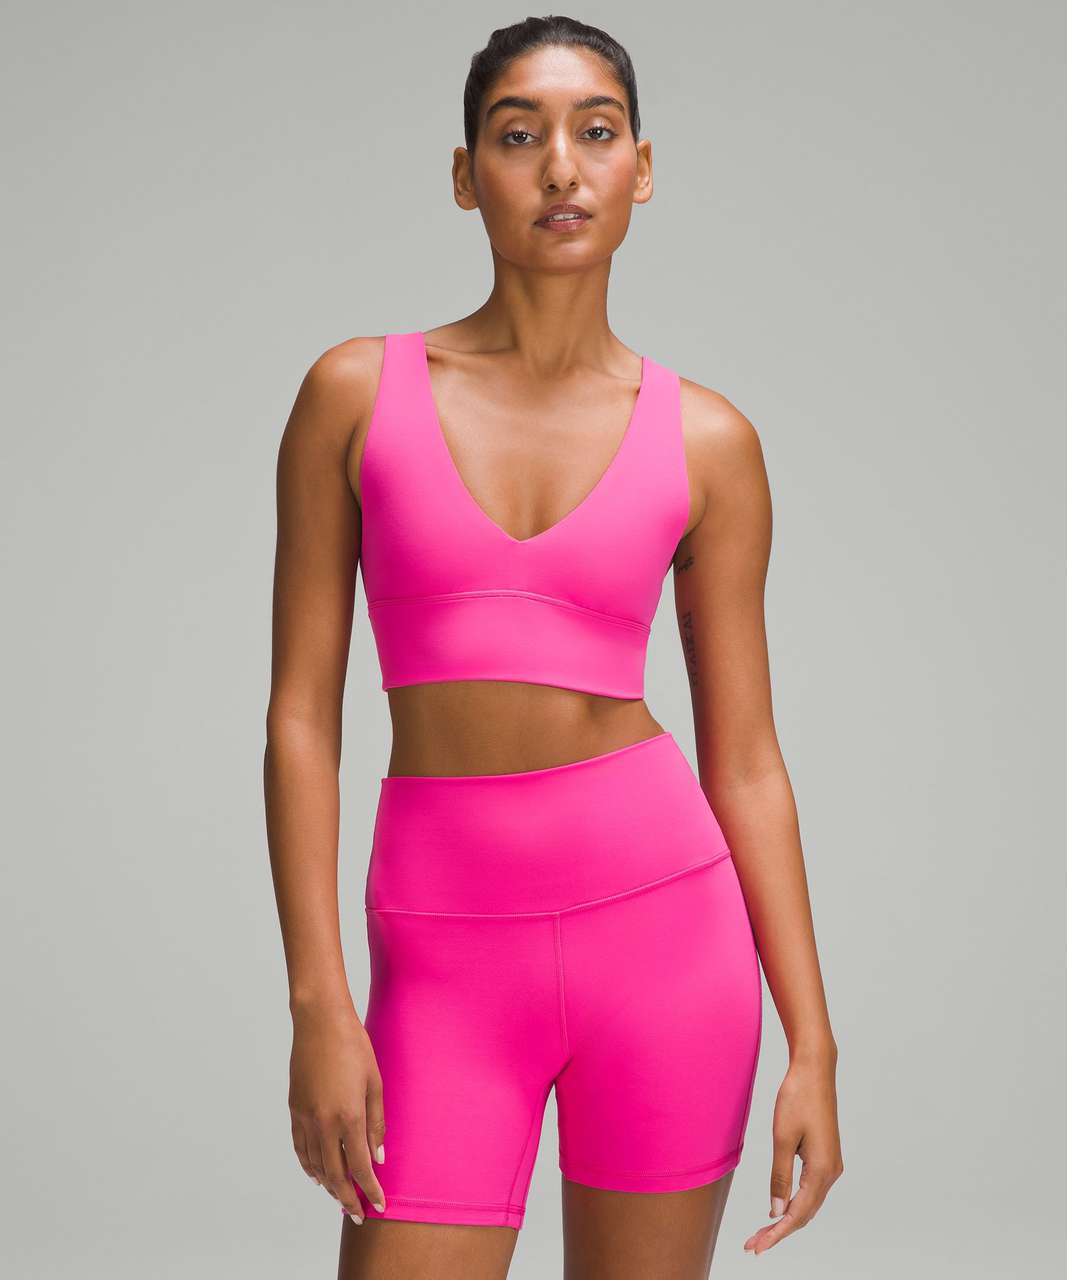 Lululemon Reversible Align Bra Pink Size 36 B - $33 (43% Off Retail) - From  Amy